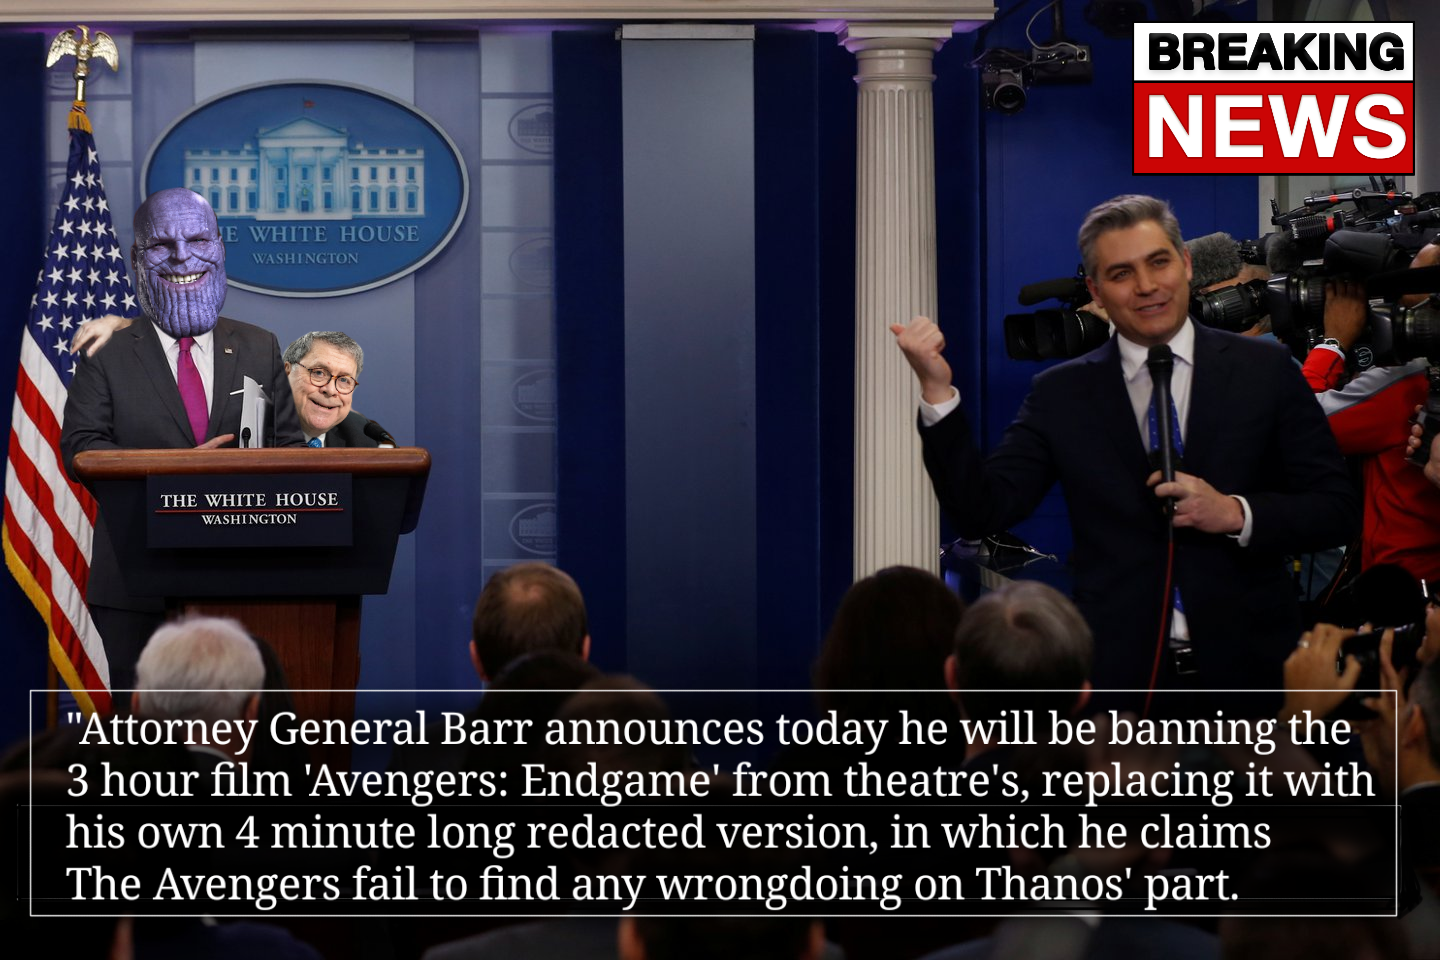 james s. brady press briefing room - Breaking News E While House Washinoon The White House Washington "Attorney General Barr announces today he will be banning the 3 hour film 'Avengers Endgame' from theatre's, replacing it with his own 4 minute long reda